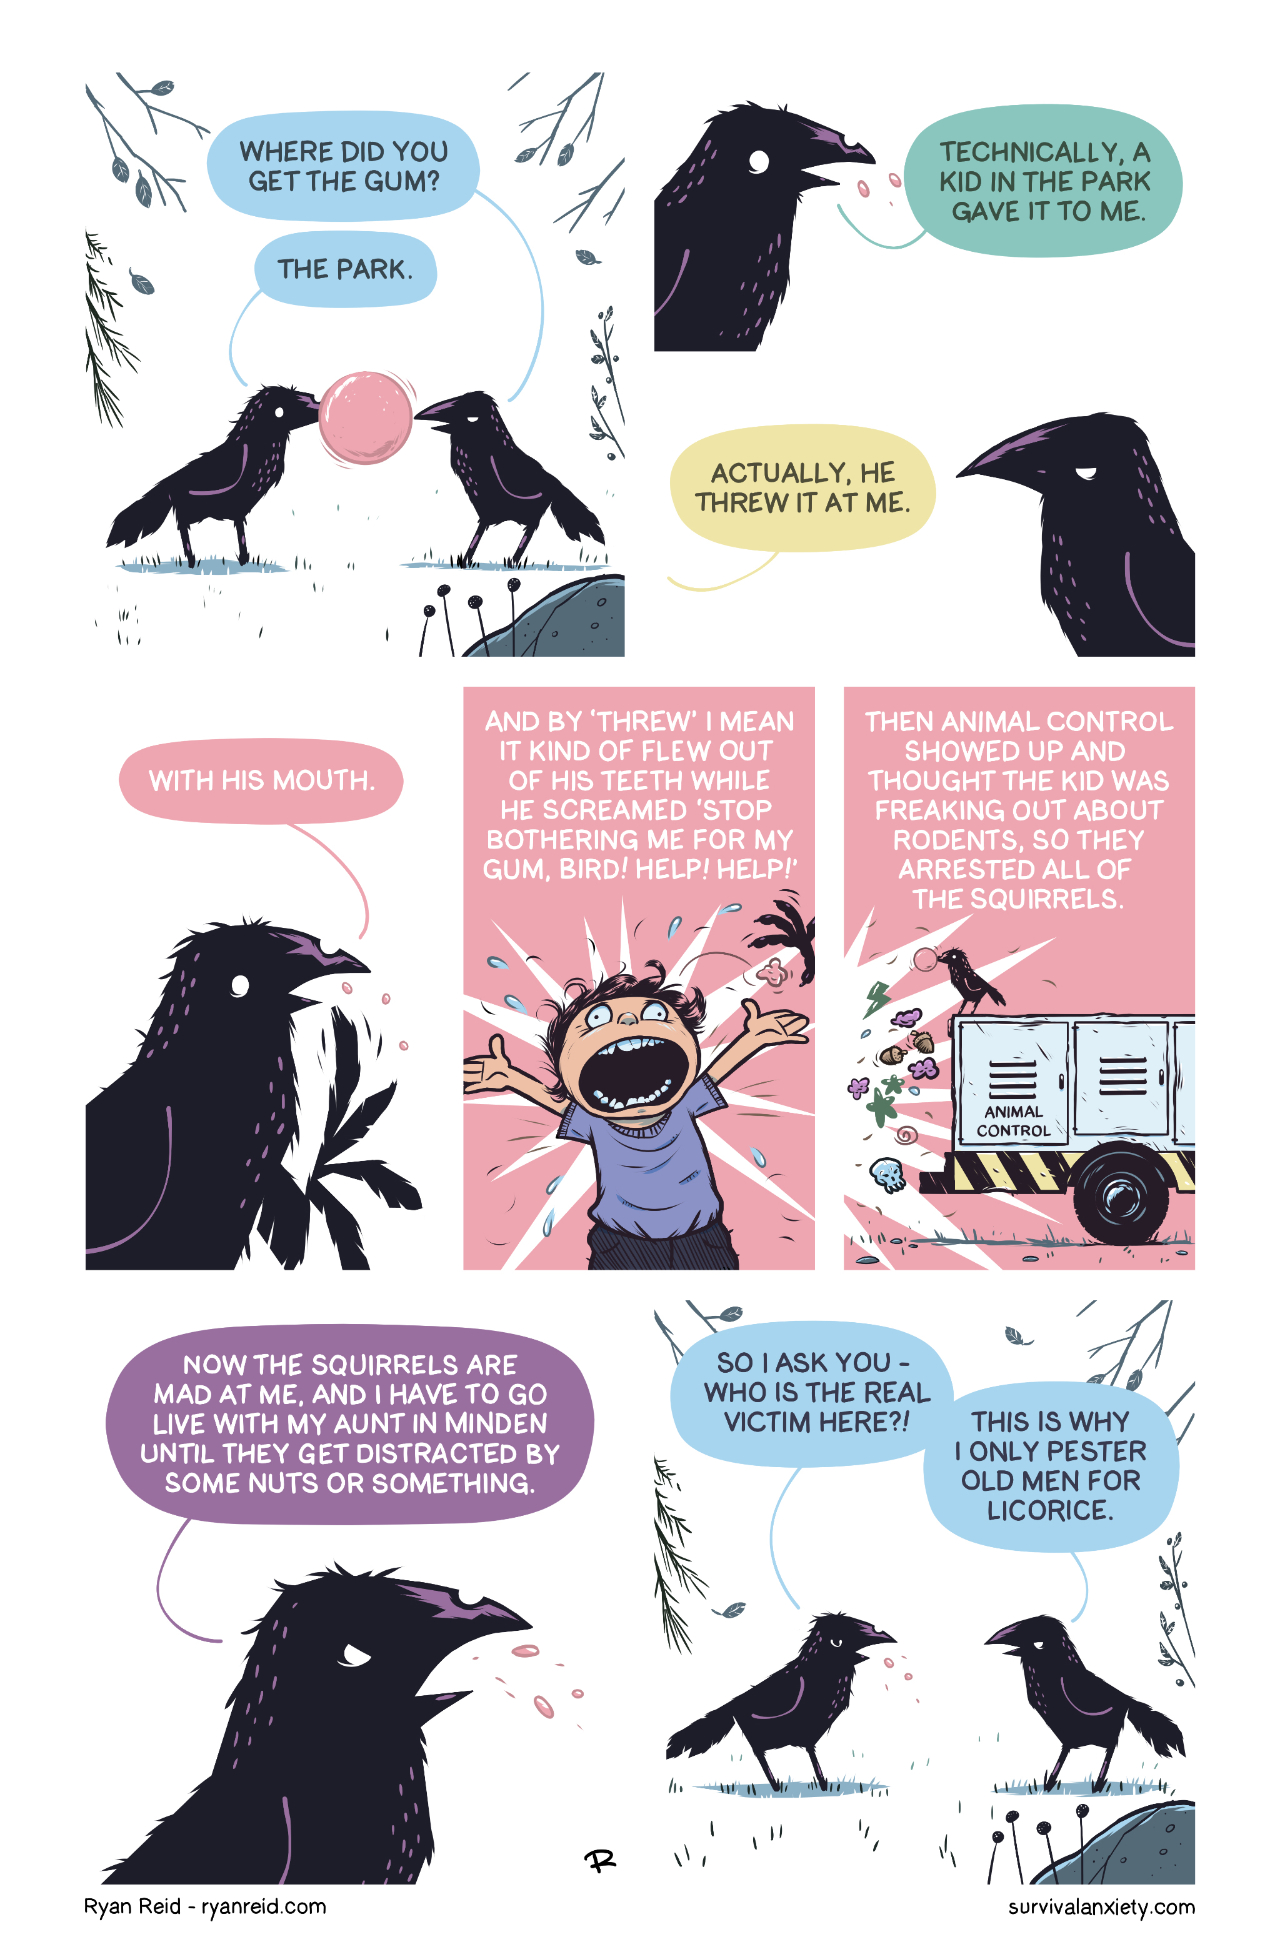 In this comic, the crows discuss the challenges of having a sweet tooth.